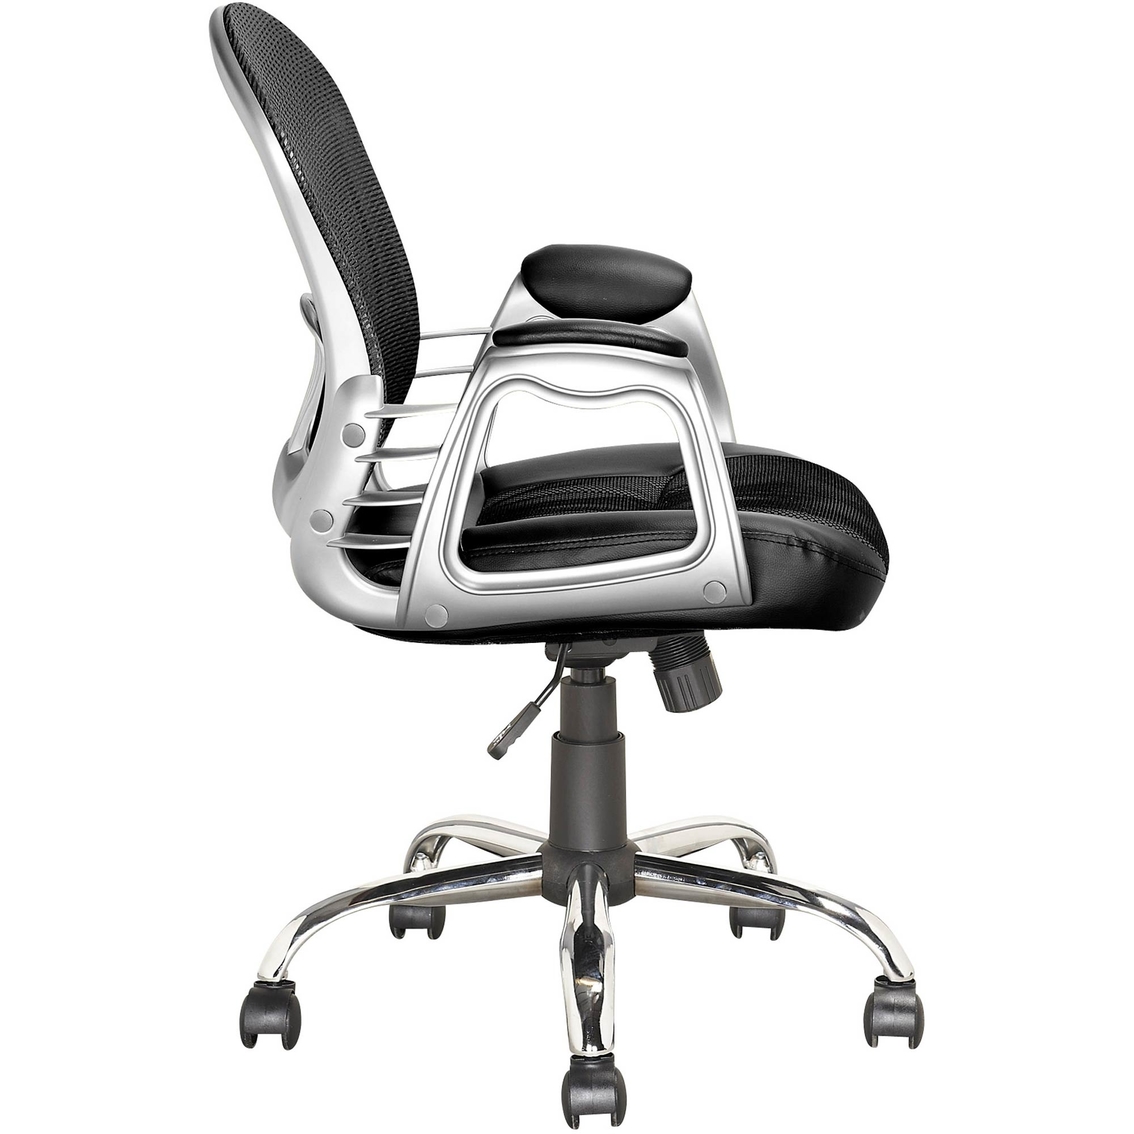 CorLiving Black Leatherette Office Chair - Image 2 of 4